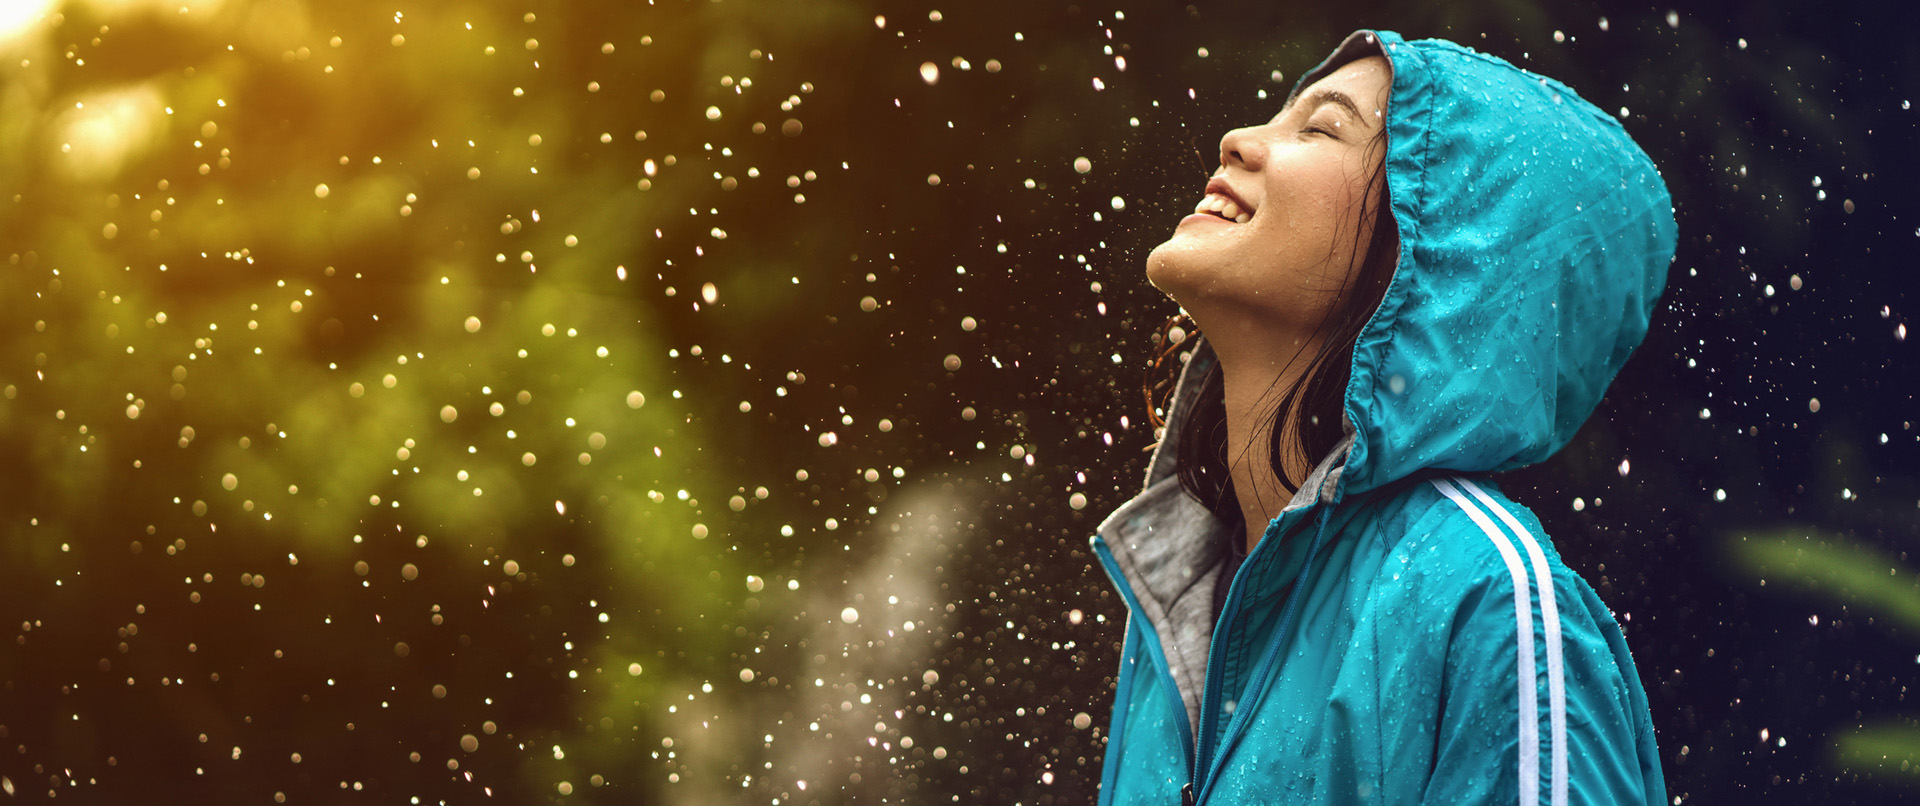 girl looking up in rain happily